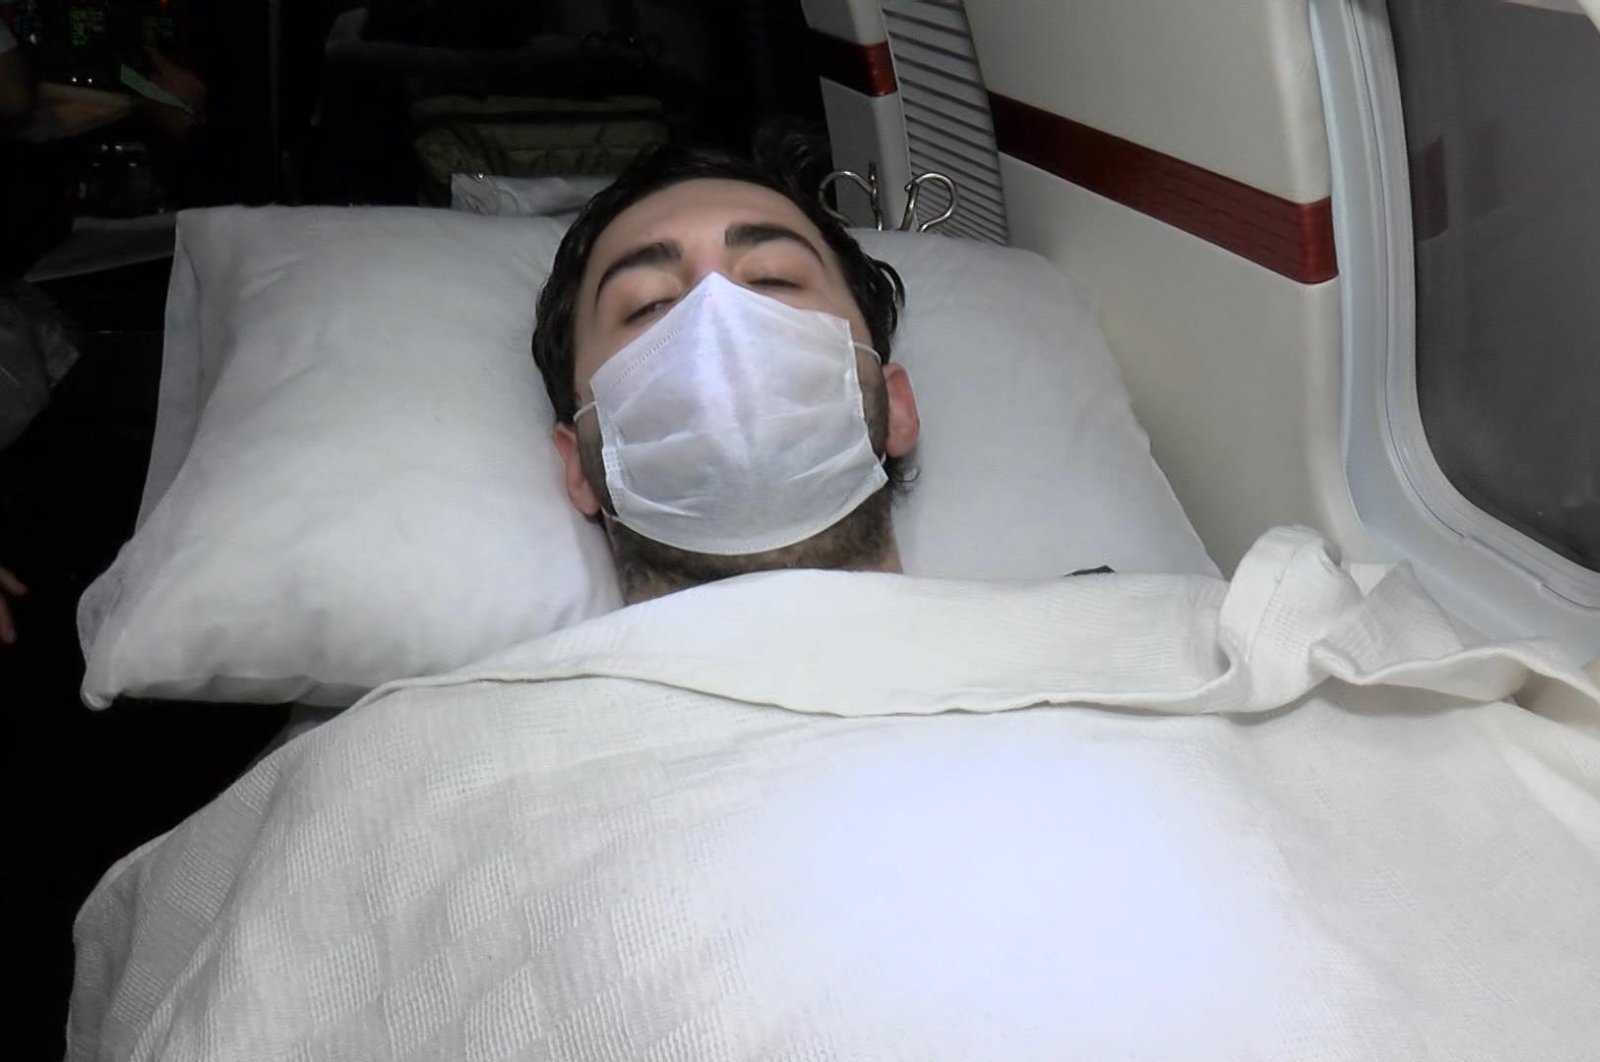 Haluk Hasan Seyithanoğlu, 24, lies on a bed inside the plane provided by the Turkish Health Ministry to take the student back to Turkey, April 27, 2020. (DHA Photo)